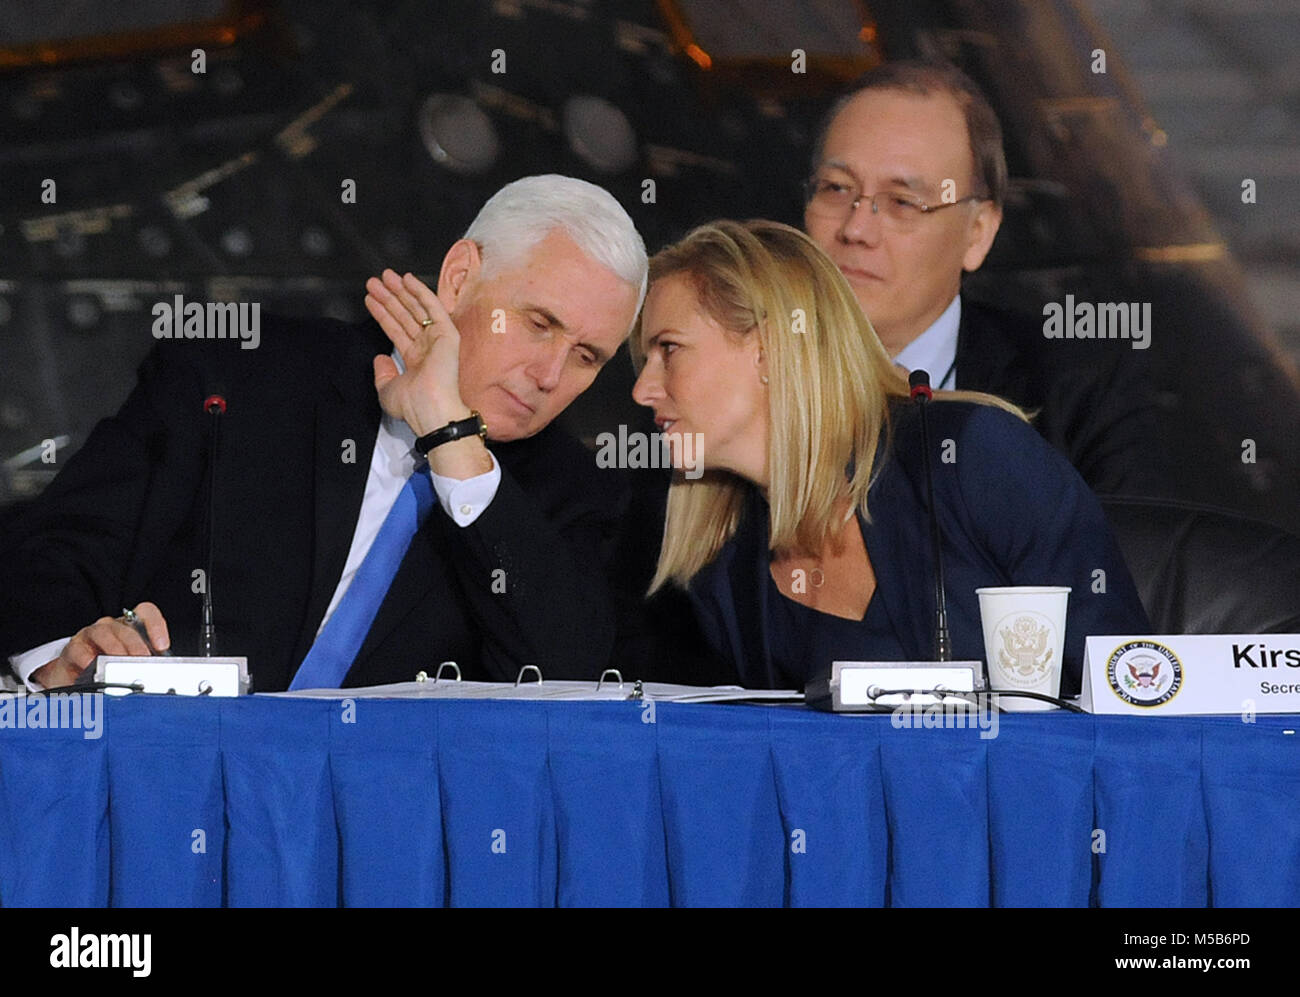 Kennedy Space Center, USA. February 21, 2018 - U.S. Vice President Mike Pence, chairman of the National Space Council, confers with Secretary of Homeland Security Kirstjen Nielsen during the group's second meeting. The Trump administration re-established the council in June, 2017. Credit: Paul Hennessy/Alamy Live News Stock Photo